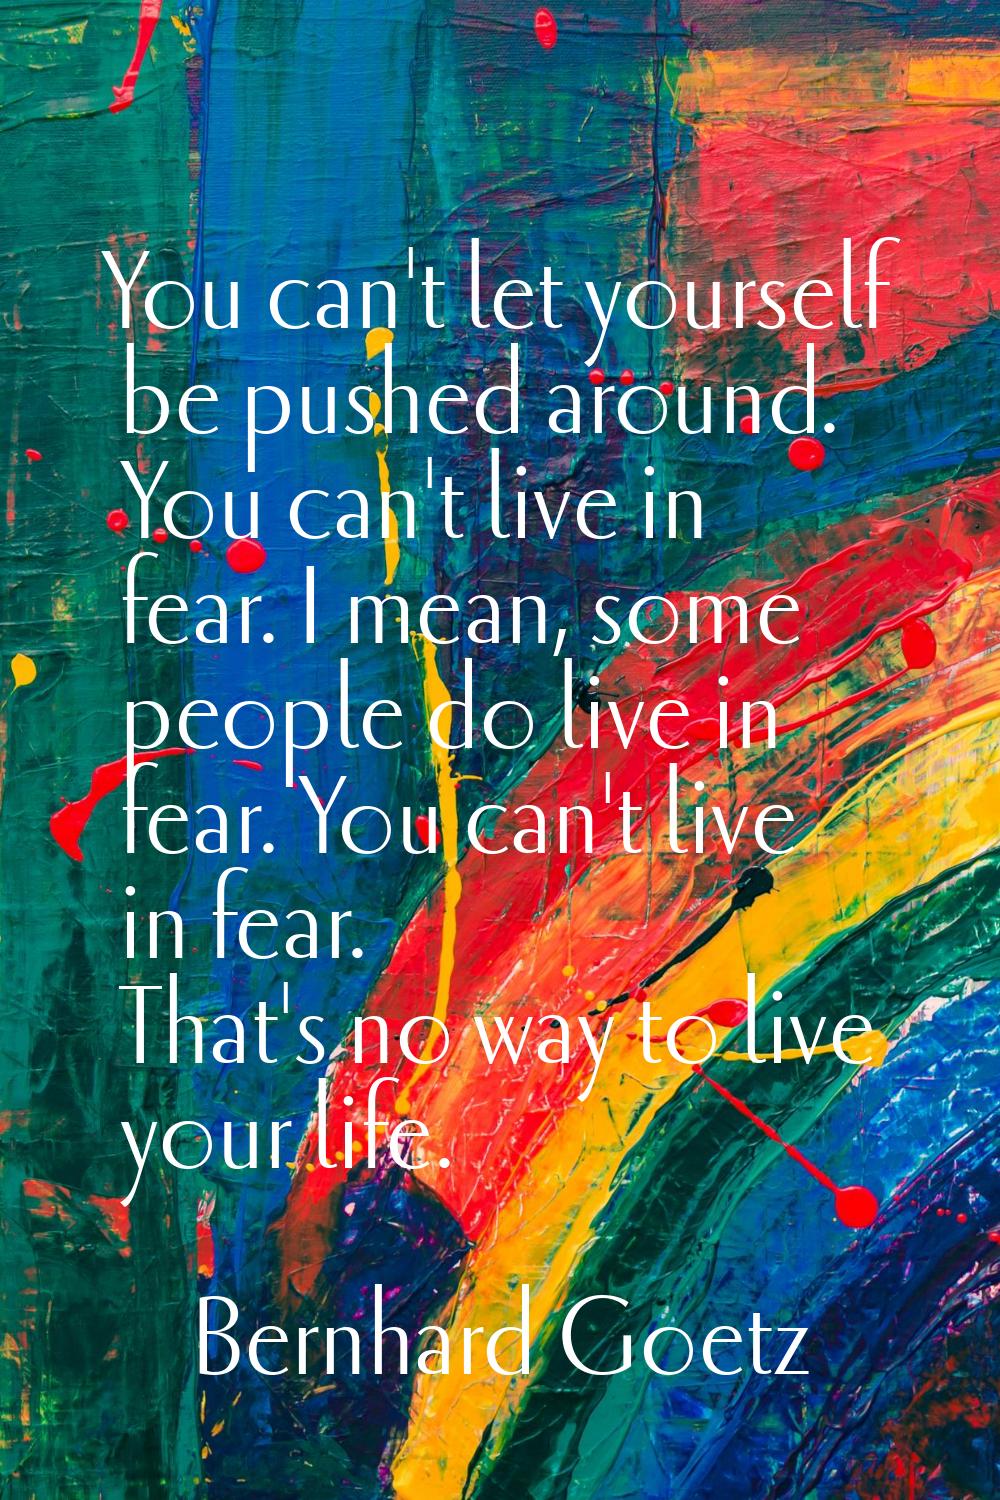 You can't let yourself be pushed around. You can't live in fear. I mean, some people do live in fea